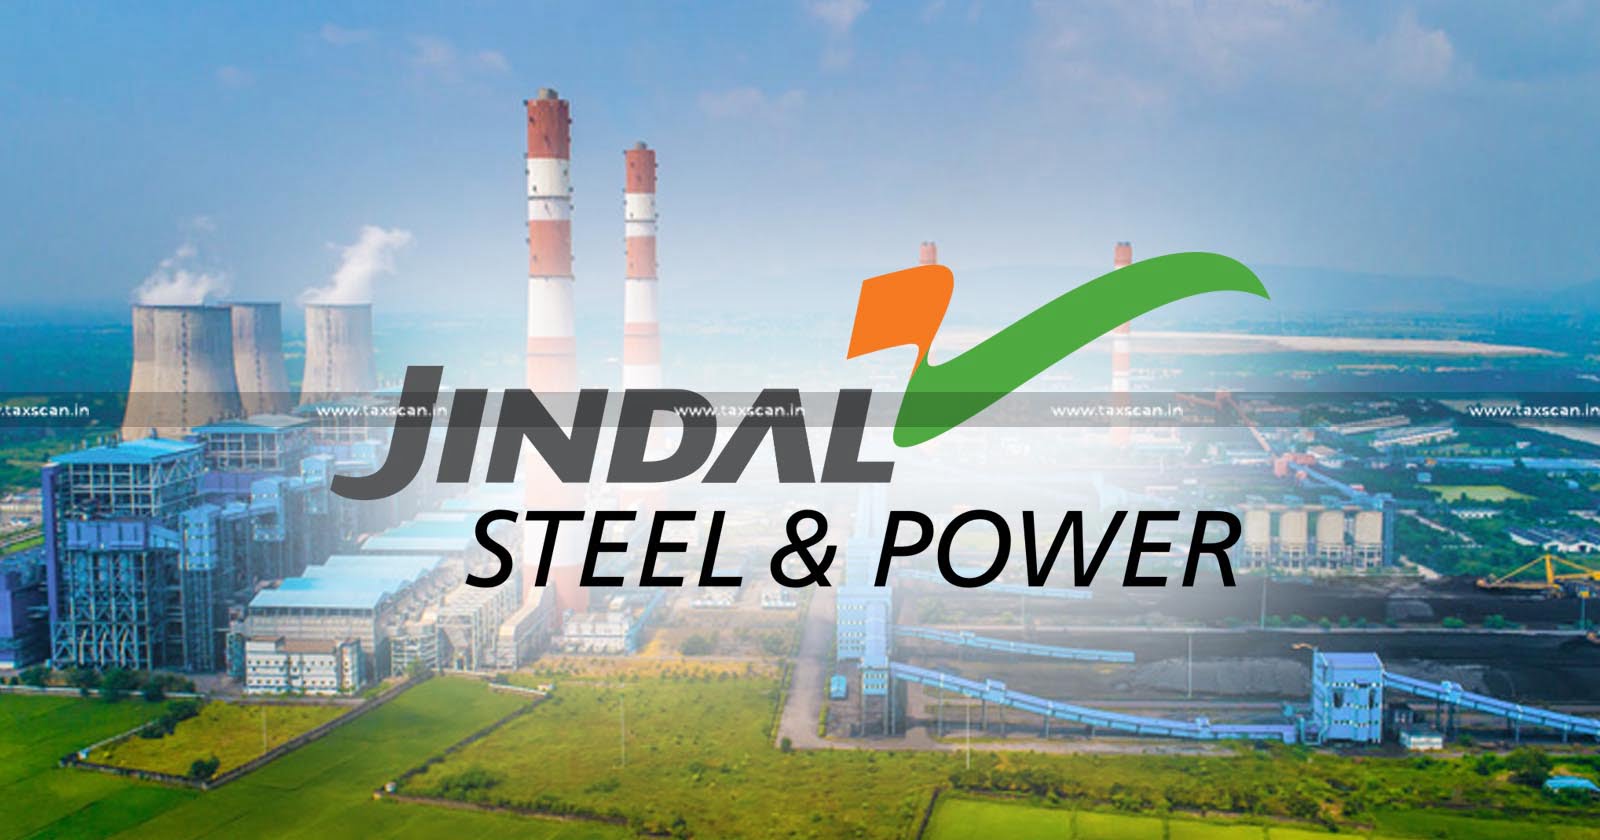 Jindal Steel and Power - Refunds must be Processed - CGST Act - GST - VAT - Orissa HC - TAXSCAN